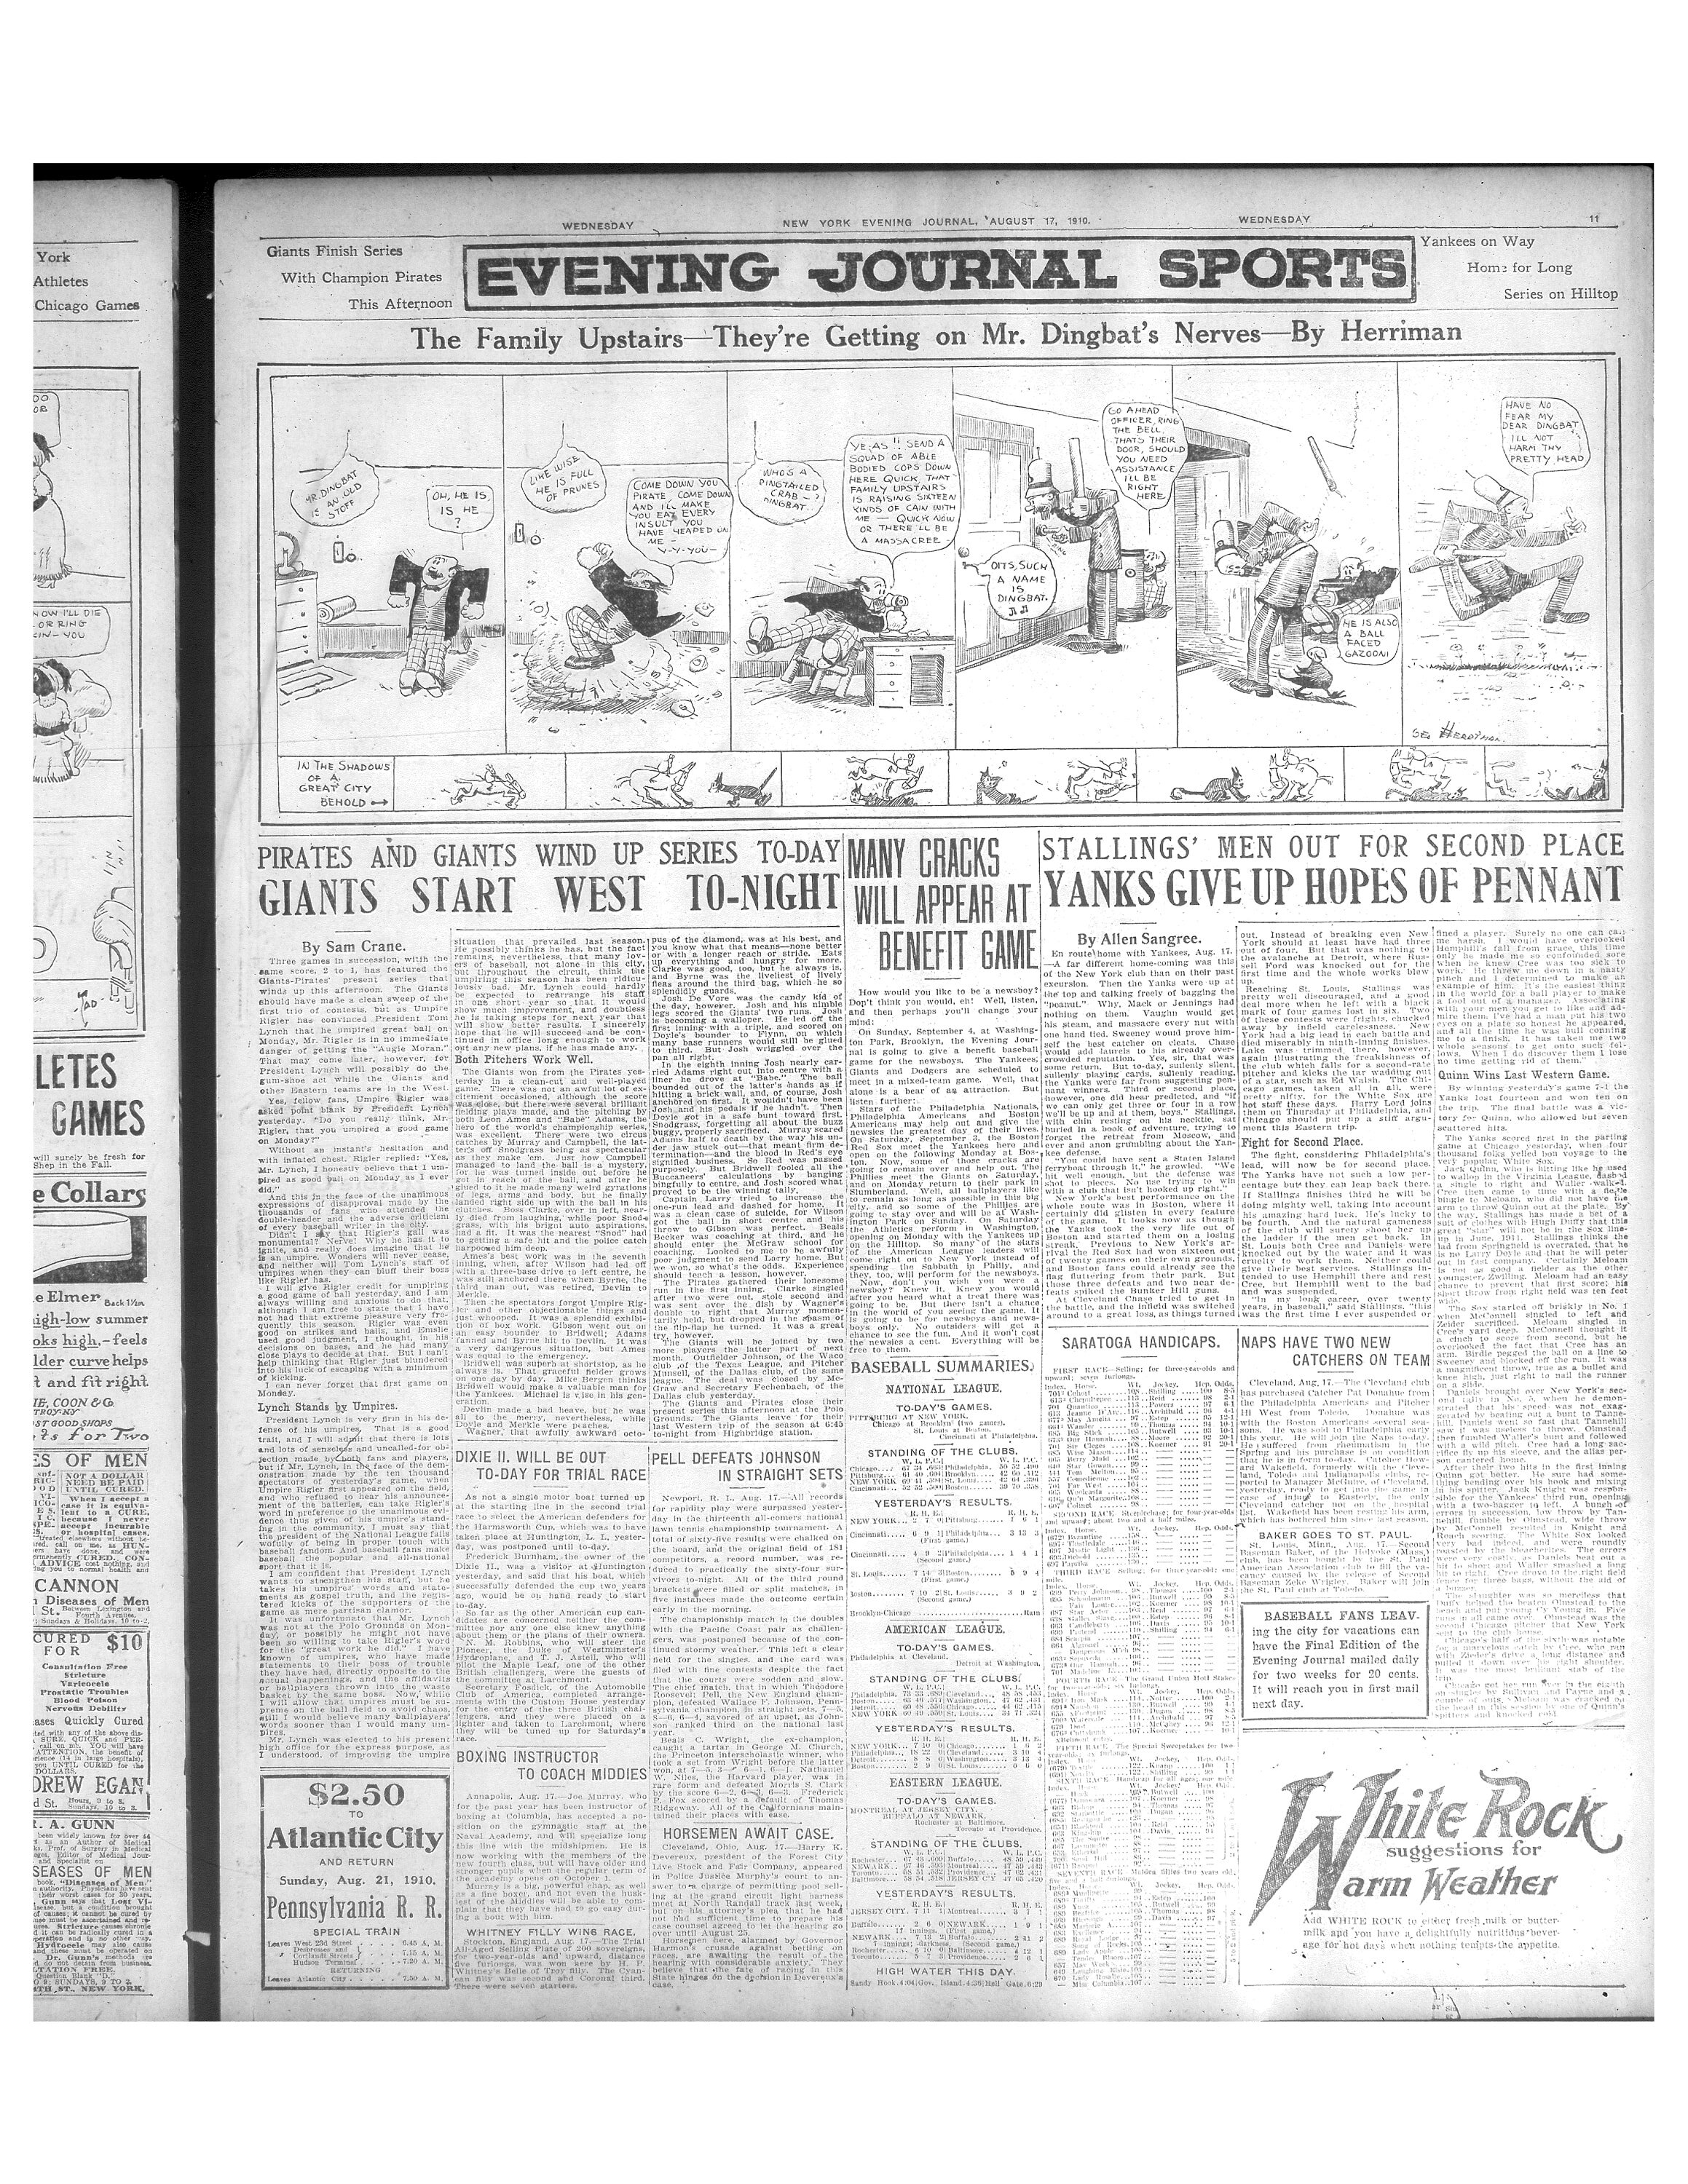 12-nyej-08-17-1910-sports-page-with-family-upstairs.jpg